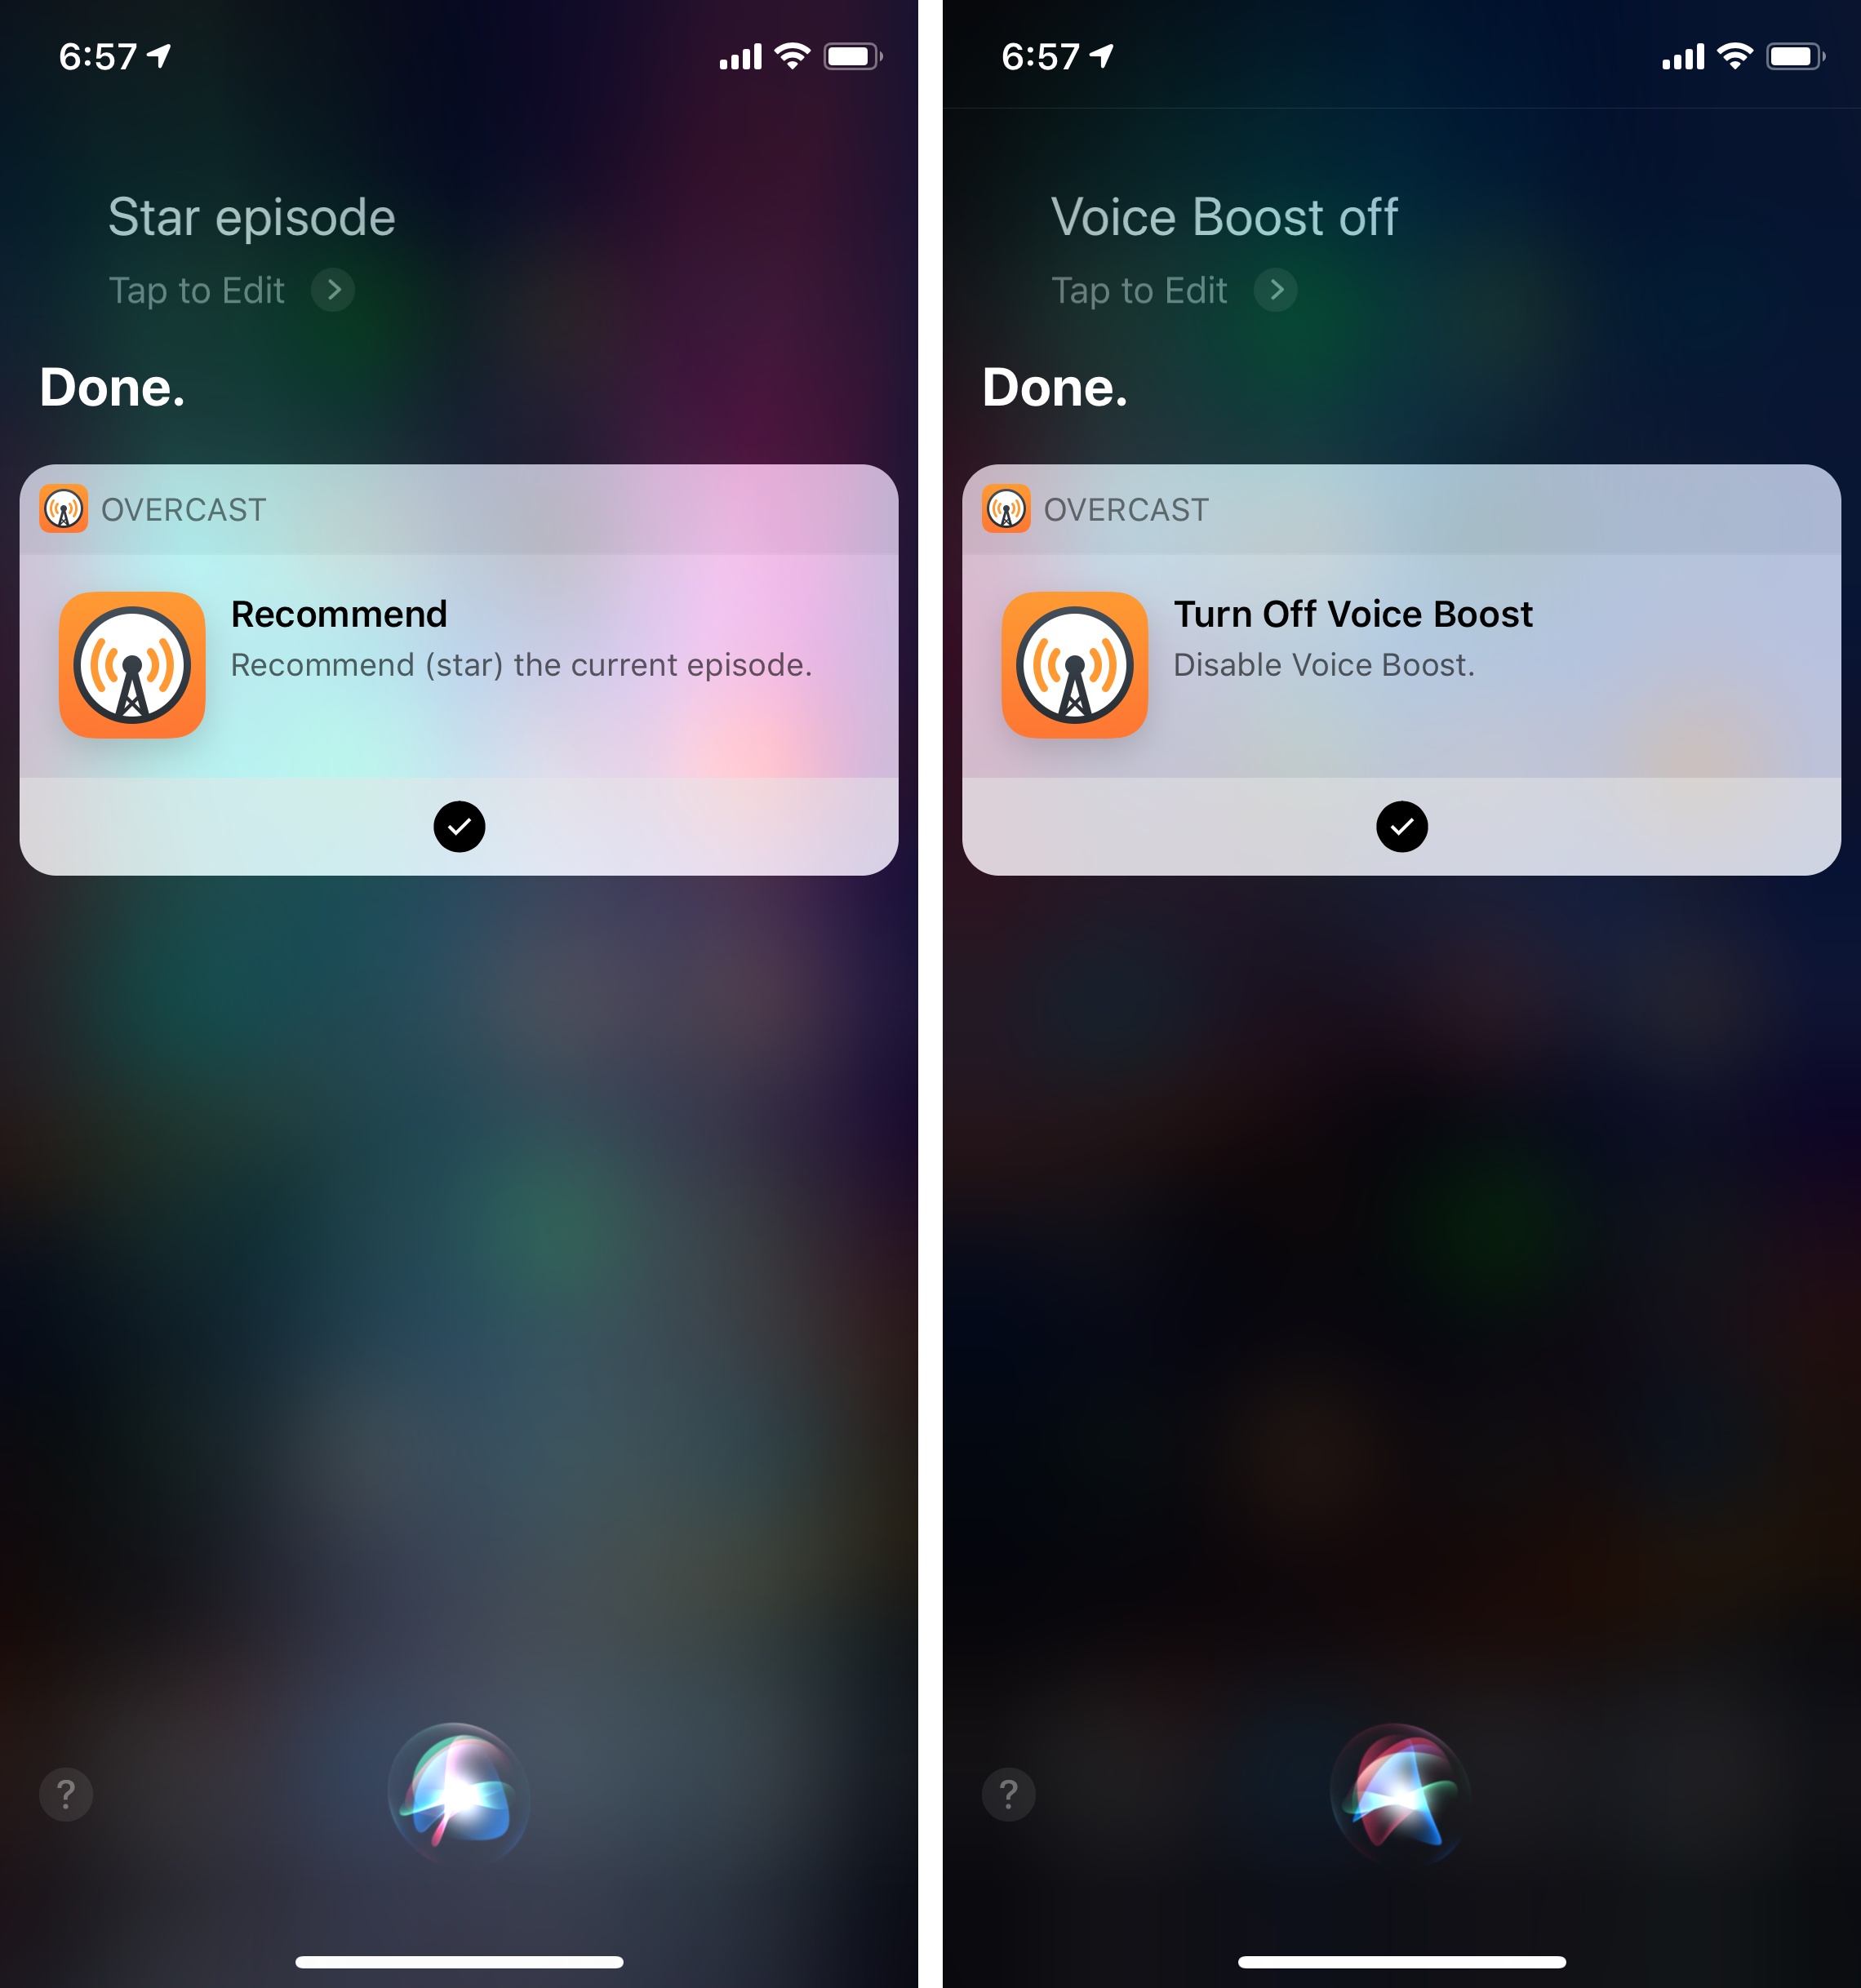 You can trigger Overcast features with Siri shortcuts as well.